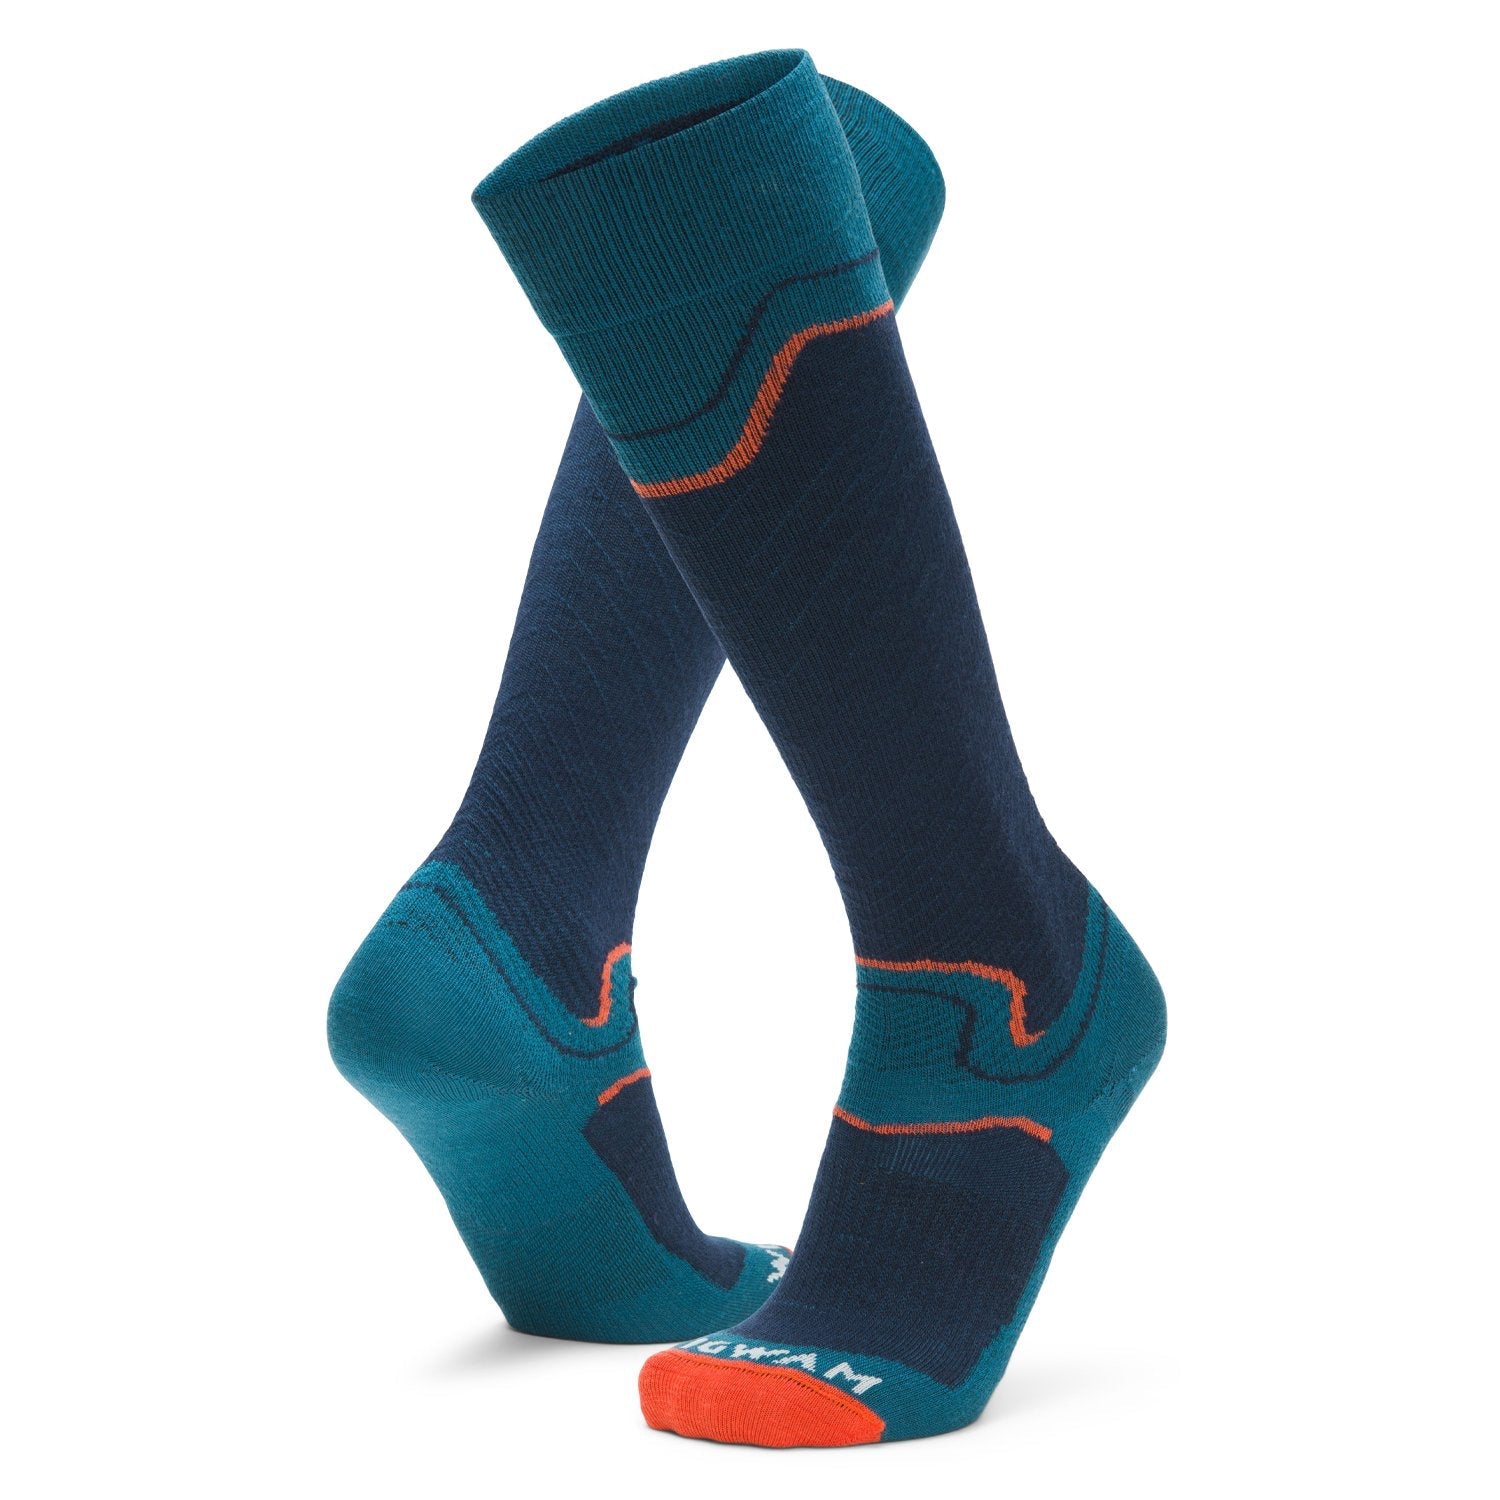 Snow Junkie Ultra Lightweight Over-The-Calf Sock - Navy II full product perspective - made in The USA Wigwam Socks